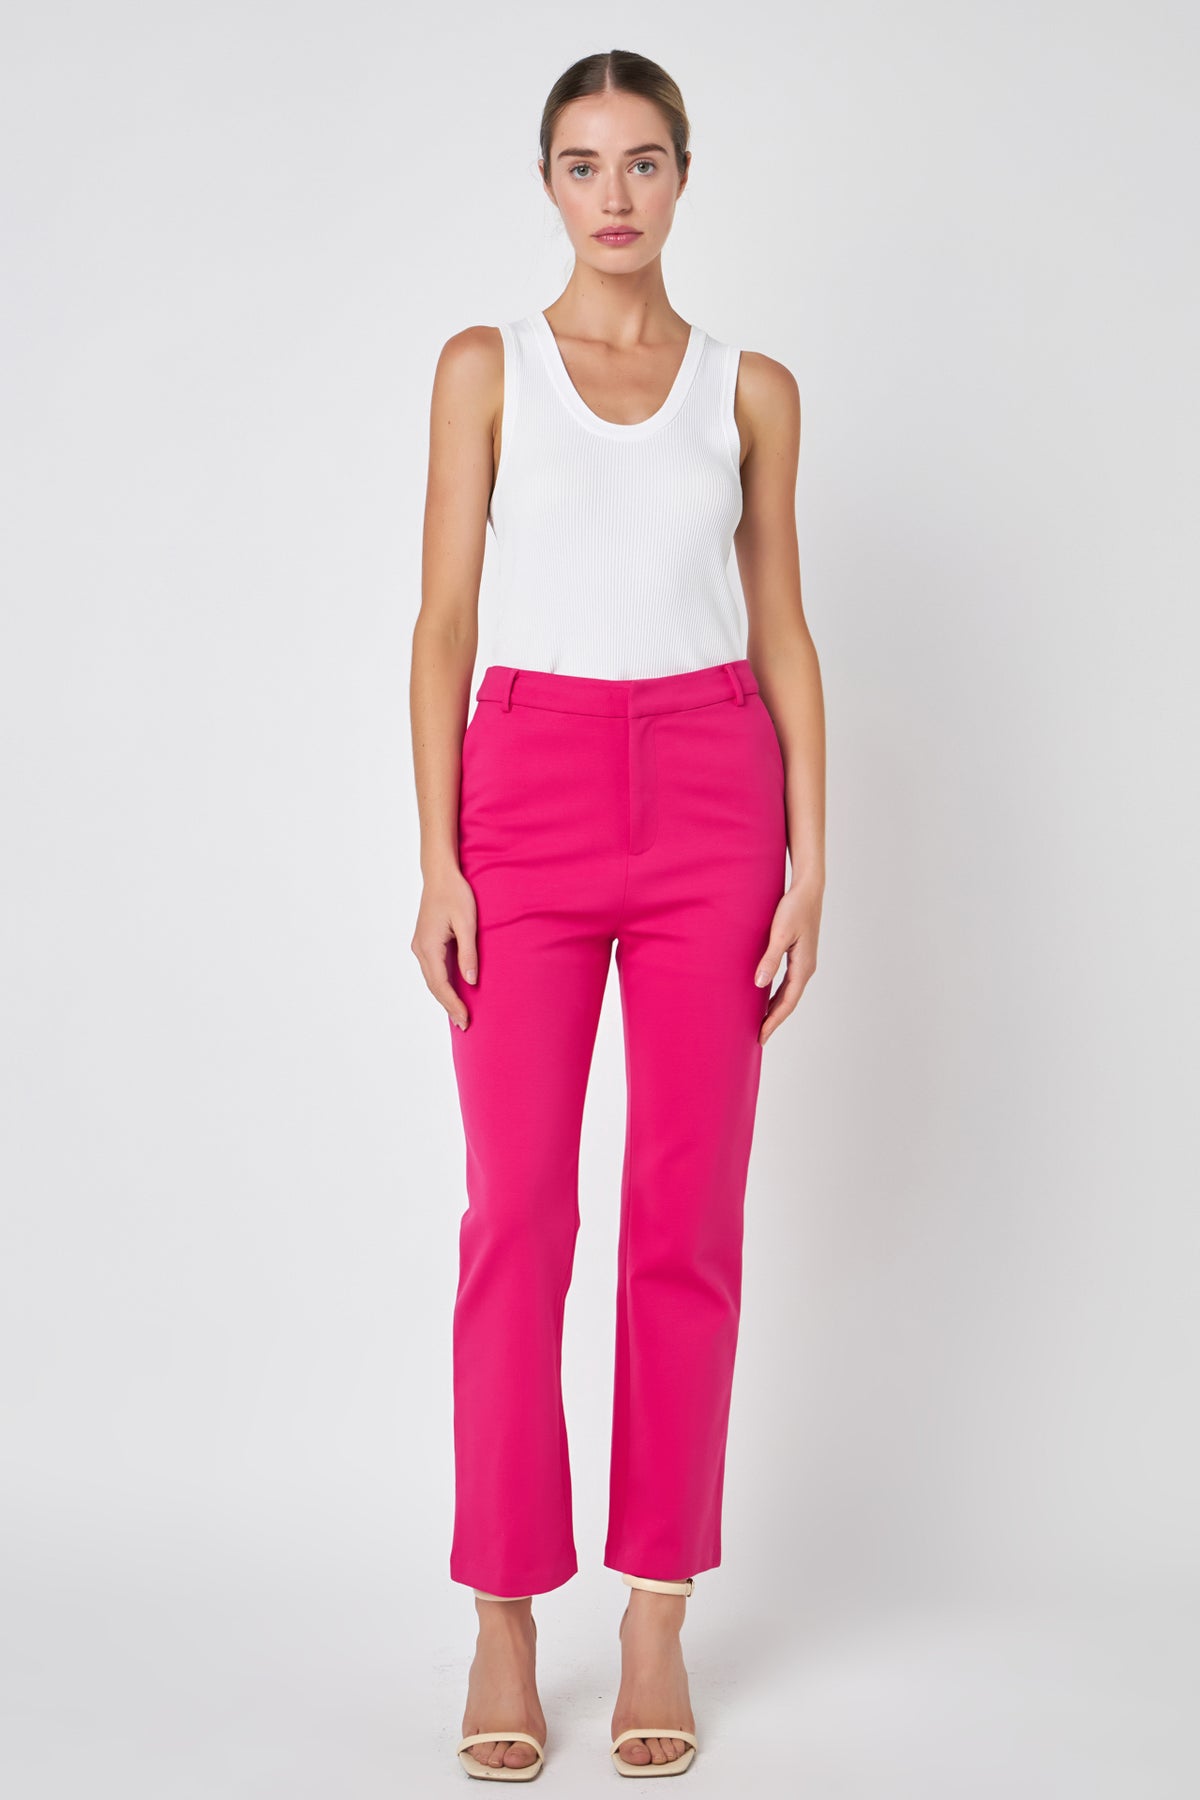 ENGLISH FACTORY - High-waist Knit Pants - PANTS available at Objectrare